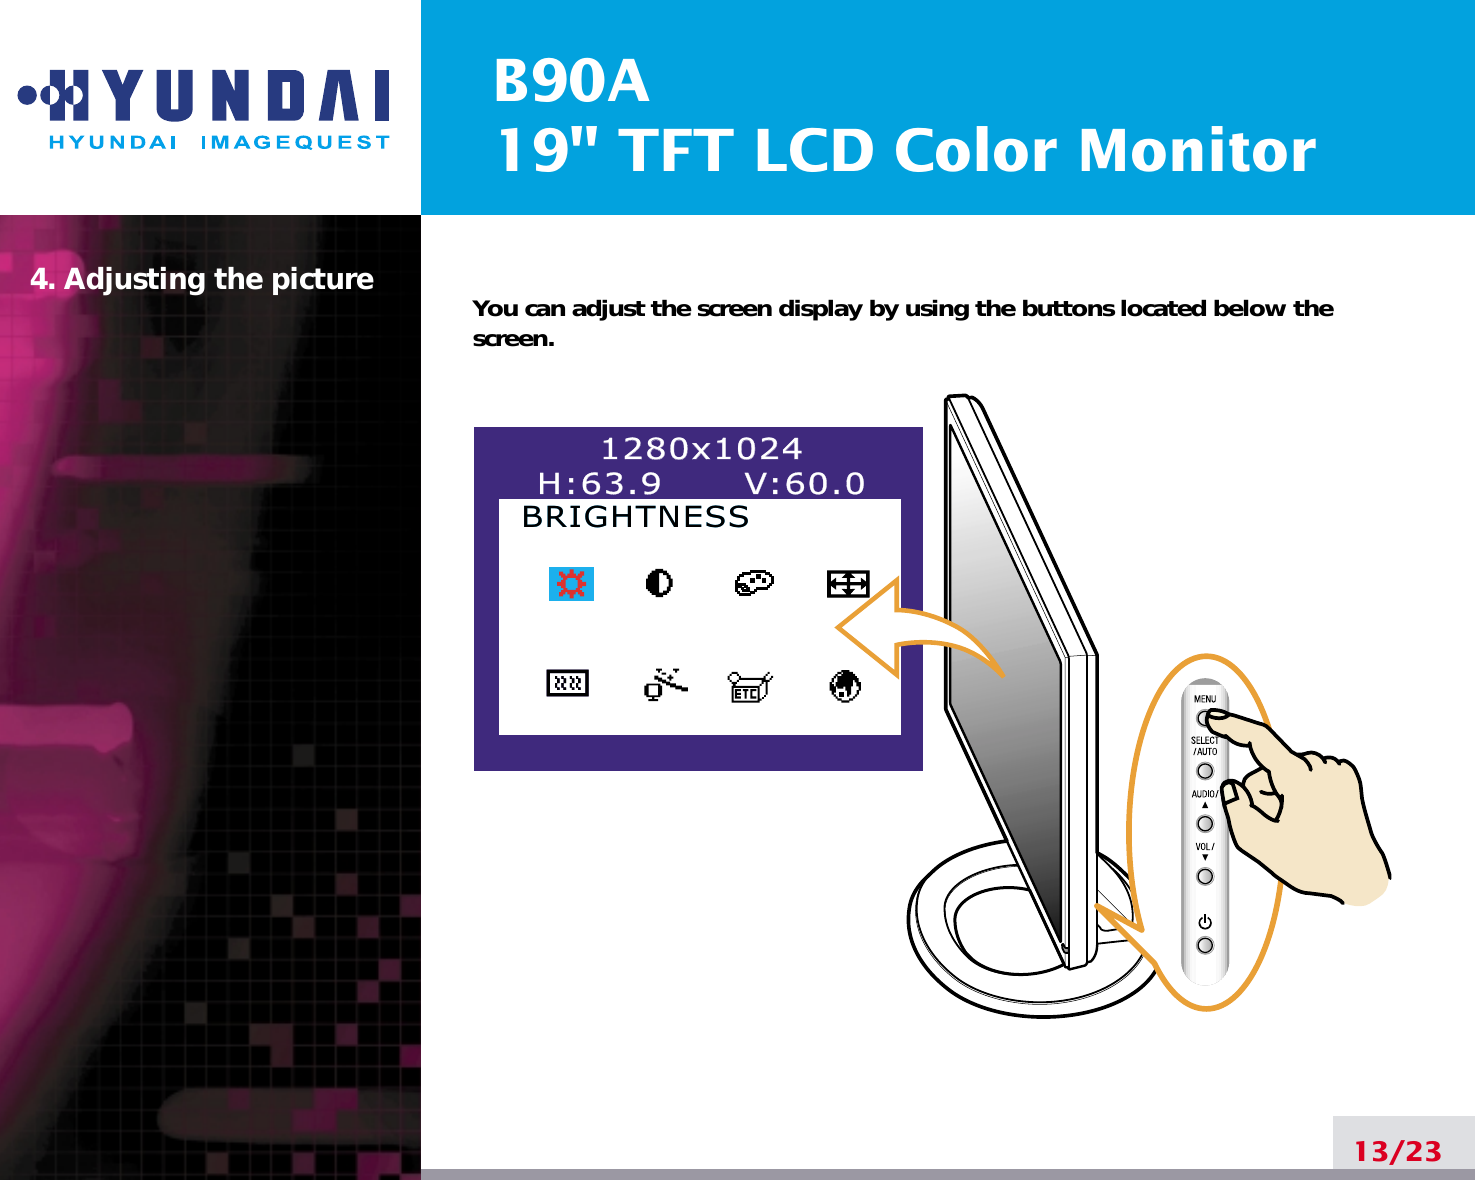 B90A19&quot; TFT LCD Color Monitor4. Adjusting the picture13/23You can adjust the screen display by using the buttons located below thescreen.1280x10241280x1024H:63.9      V:60.0H:63.9      V:60.0BRIGHTNESSBRIGHTNESS